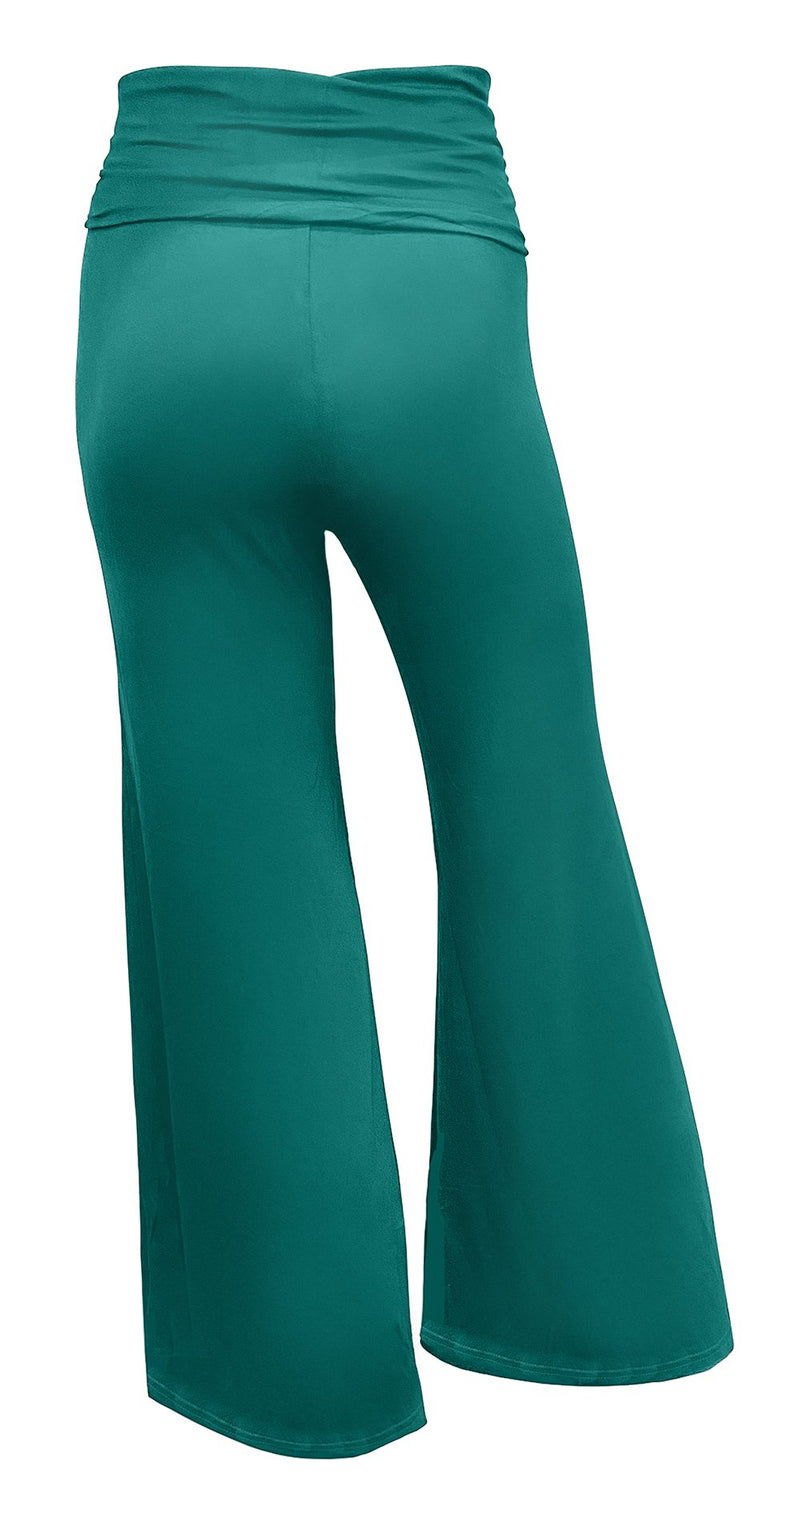 Chartreuse Green 100% Modal Eco Friendly Pant